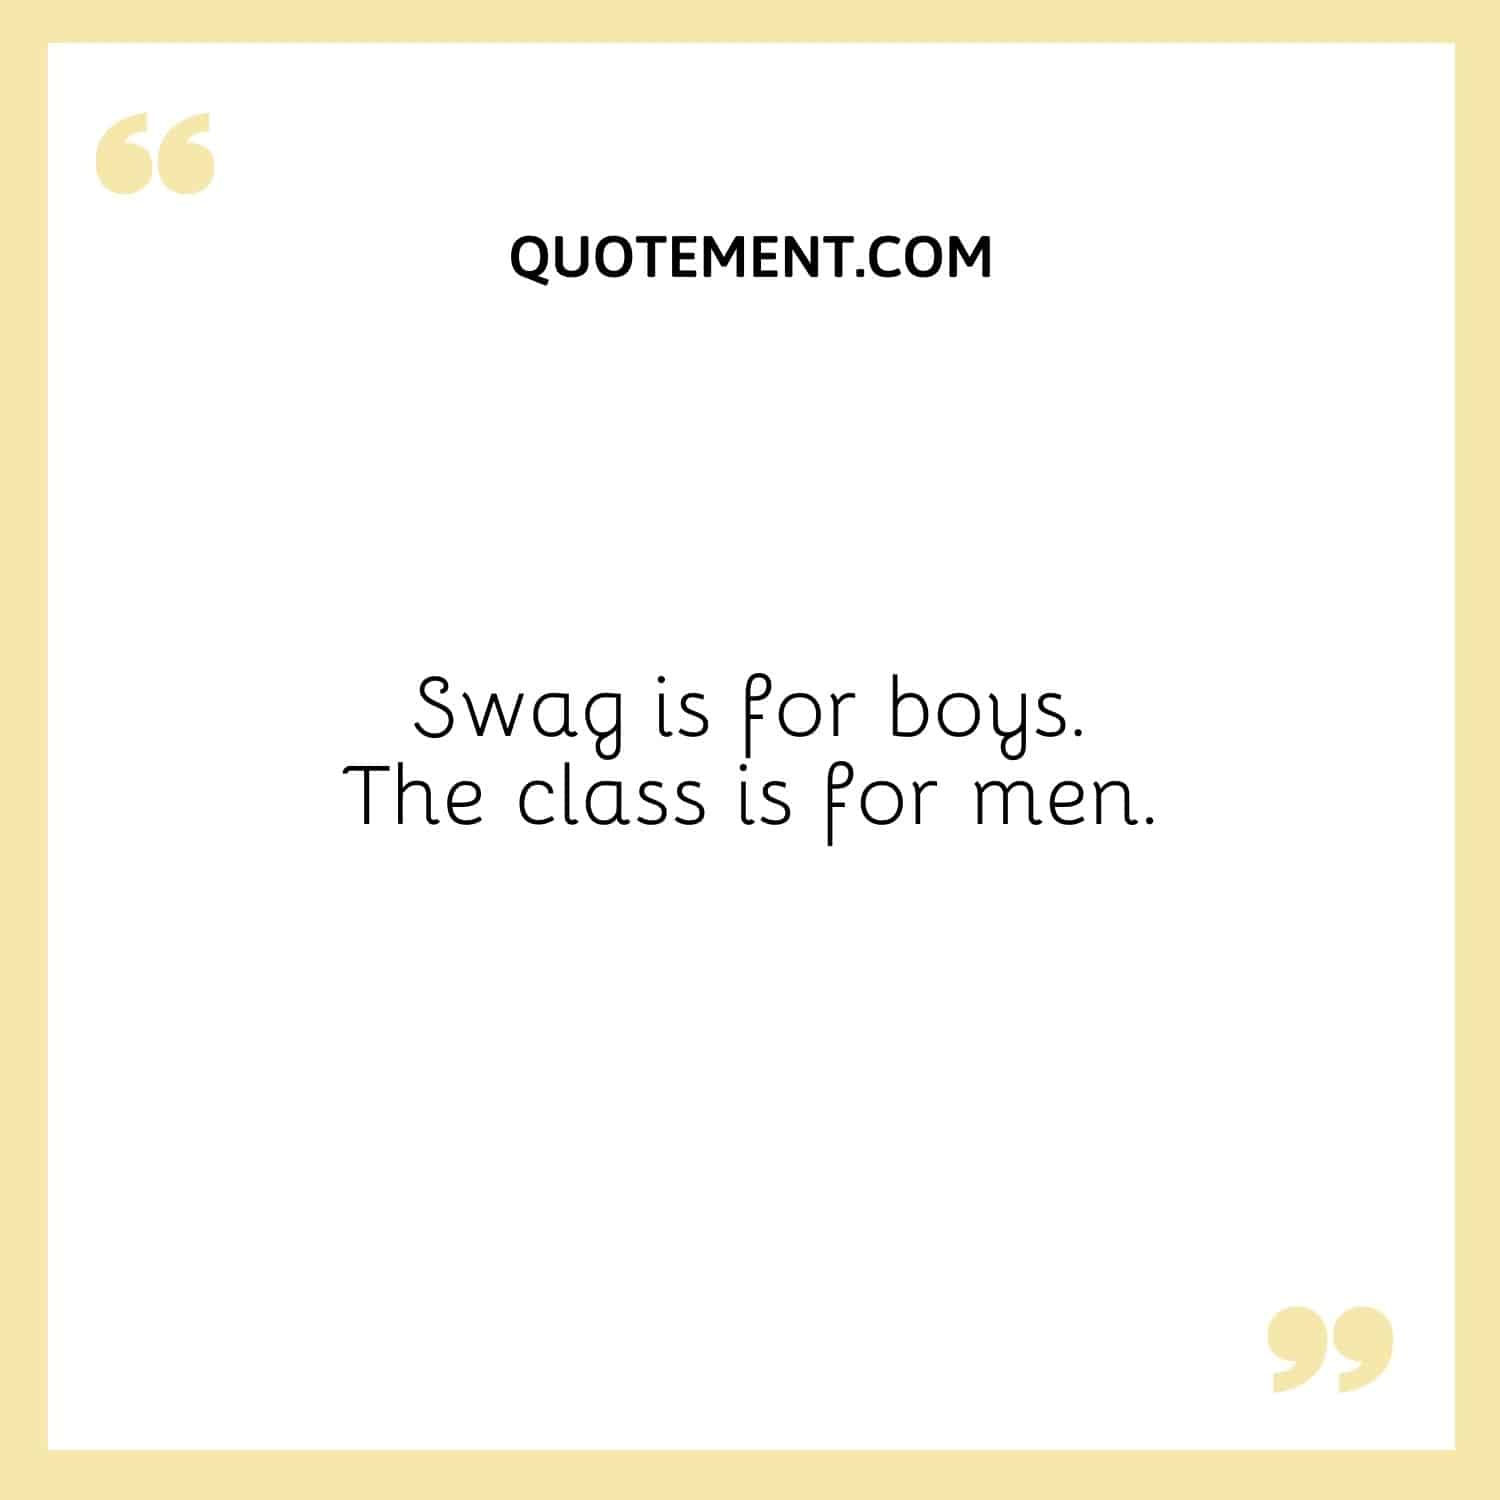 Swag is for boys. The class is for men.